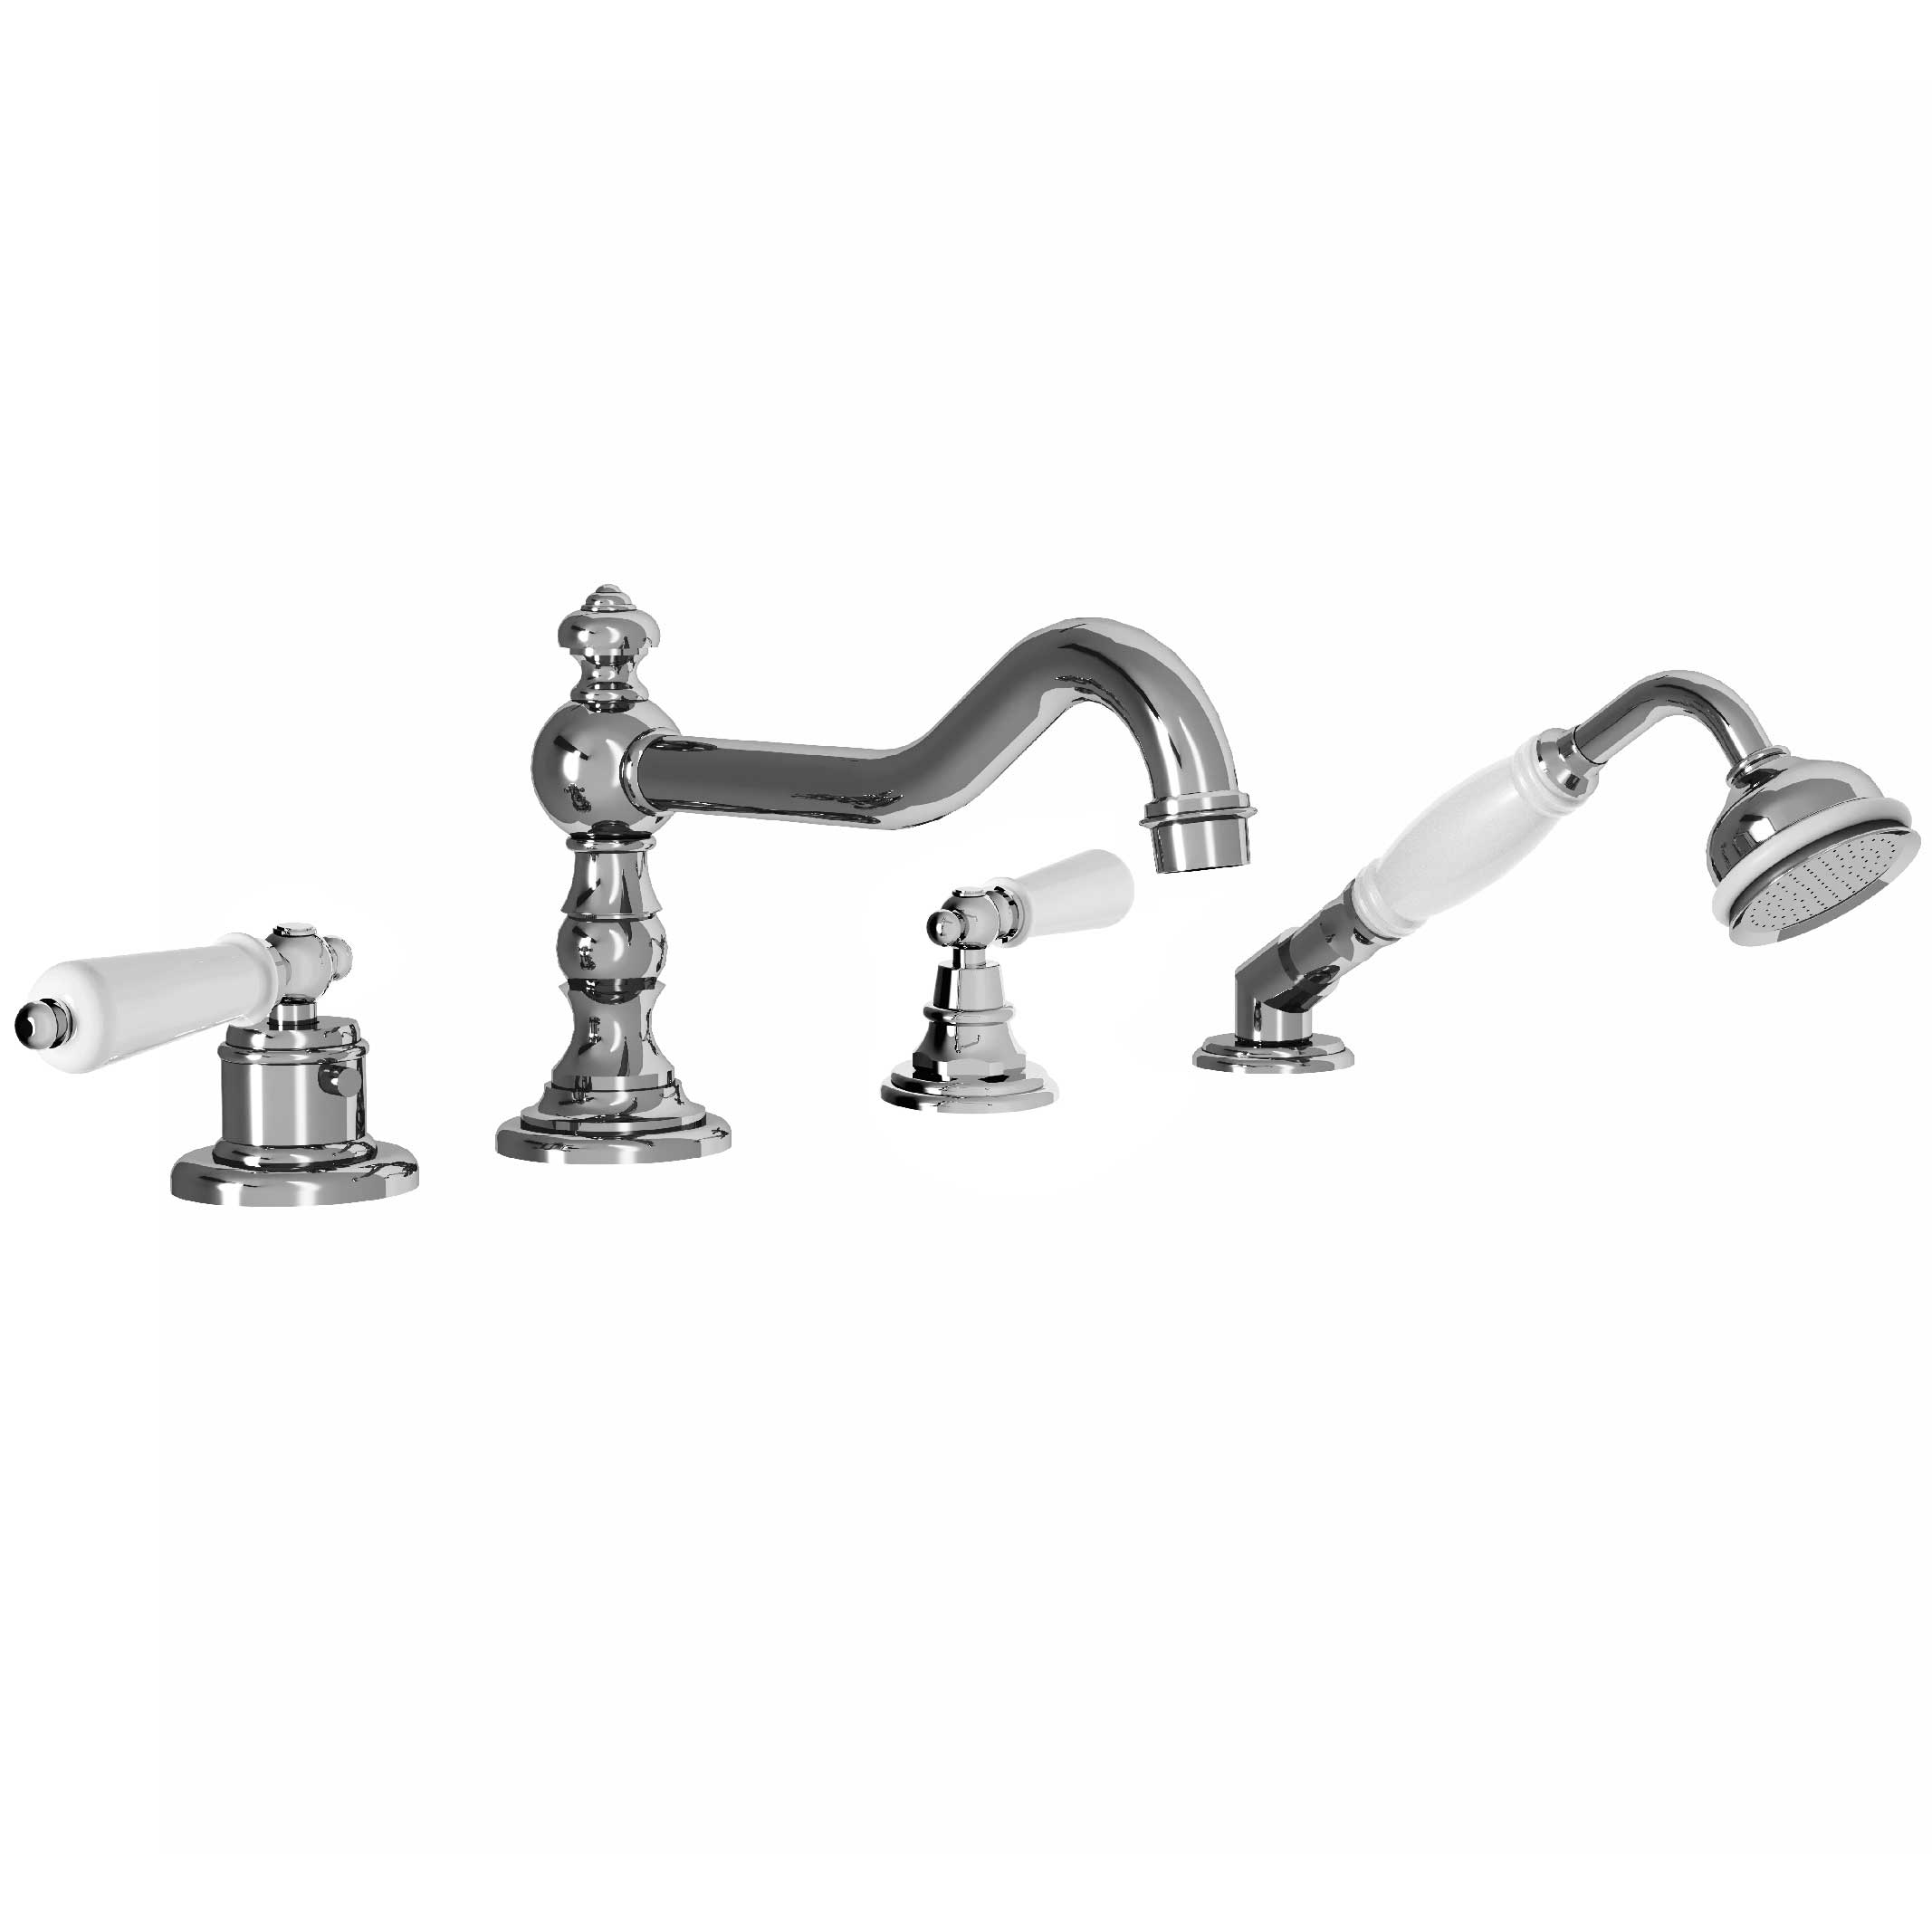 M04-3304TXL XL 4-hole bath and shower thermo. mixer